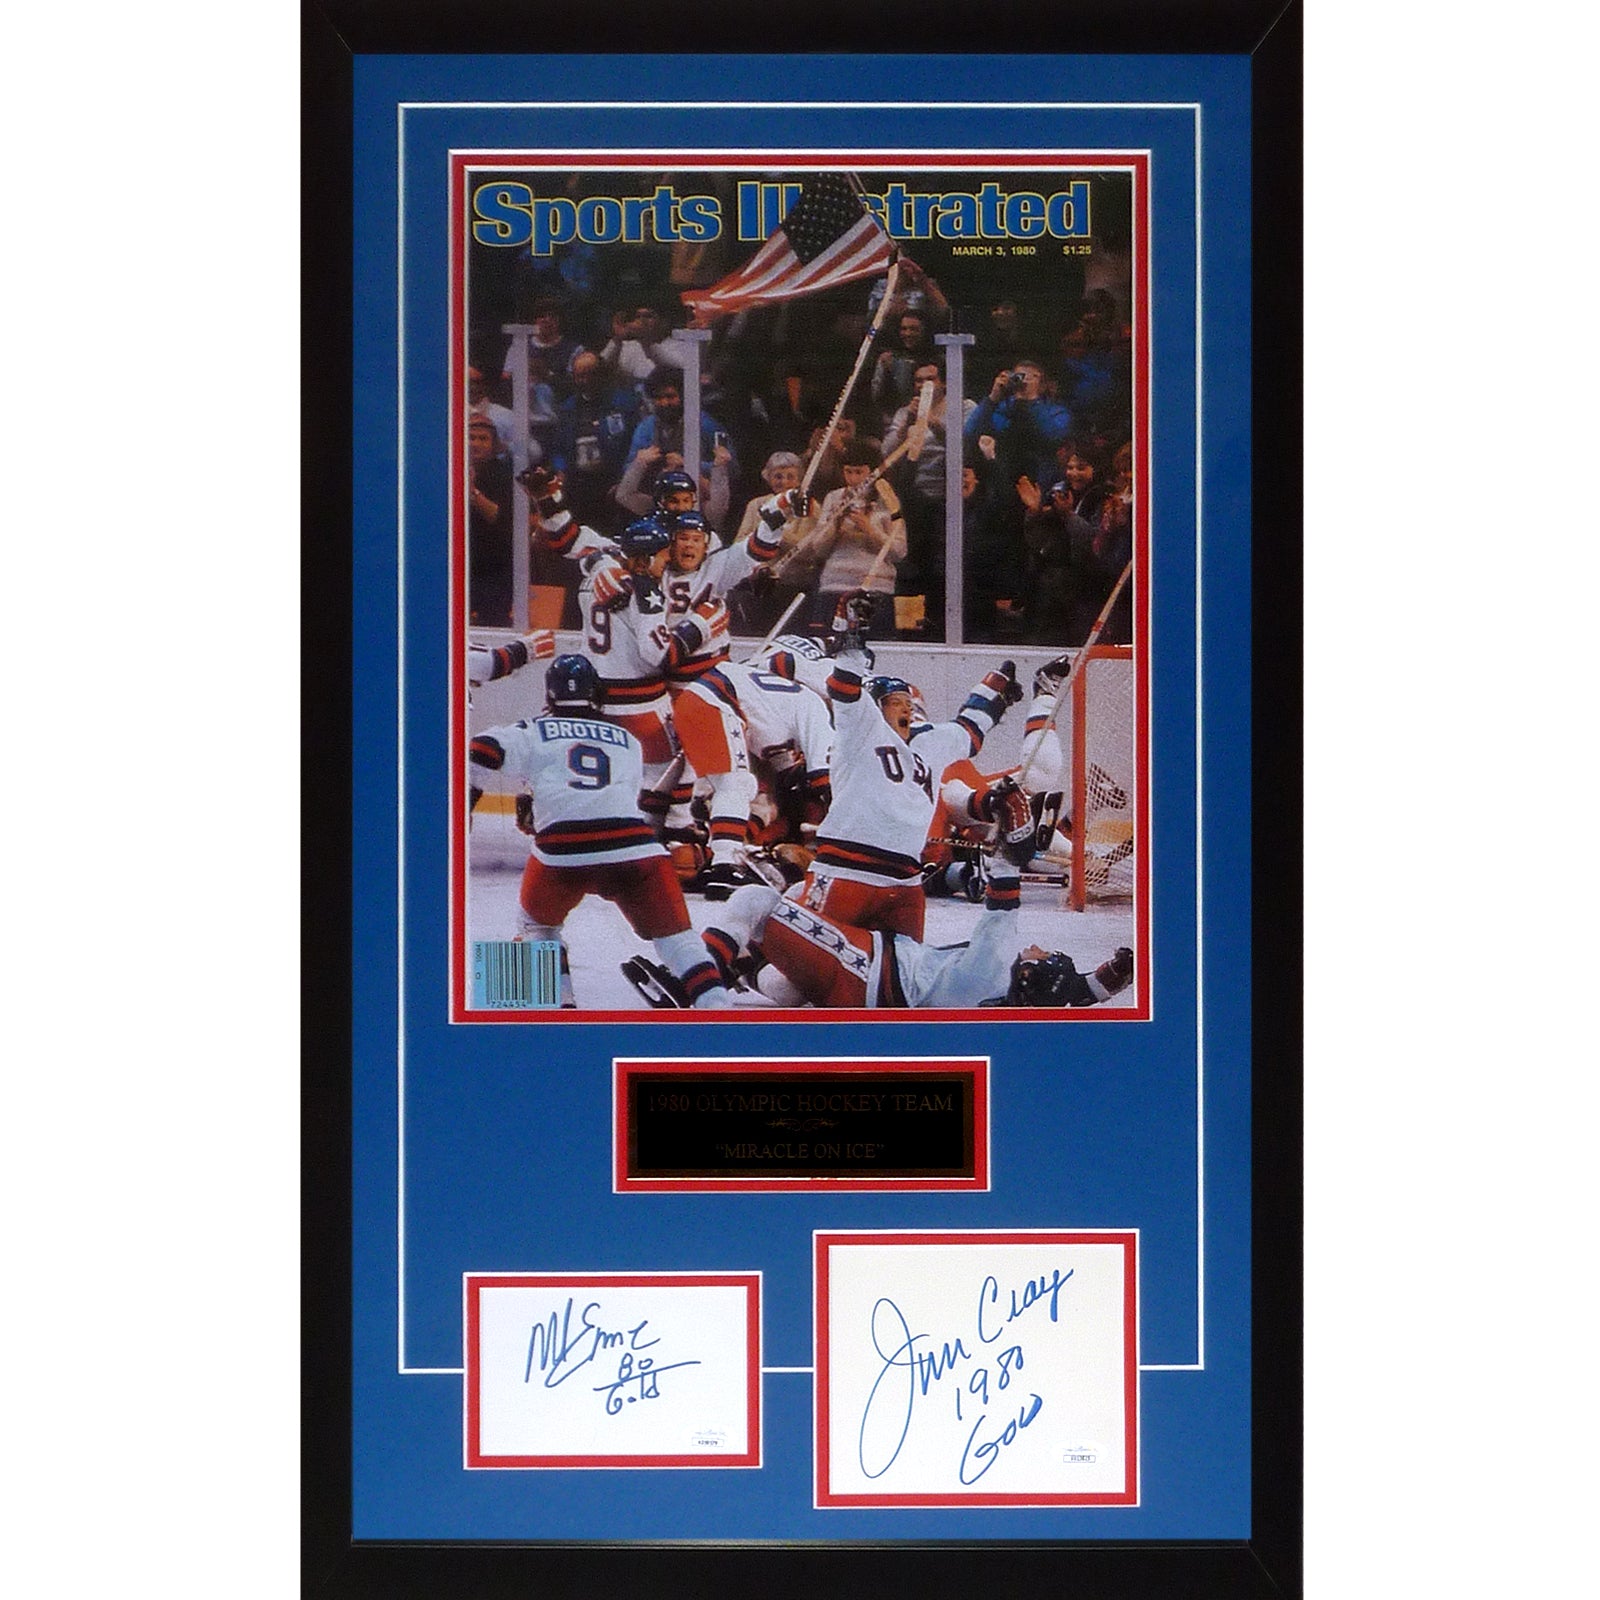 1980 USA Olympic Hockey 11x17 Sports Illustrated Poster Deluxe Framed with Jim Craig And Mike Eruzione Autographs - JSA